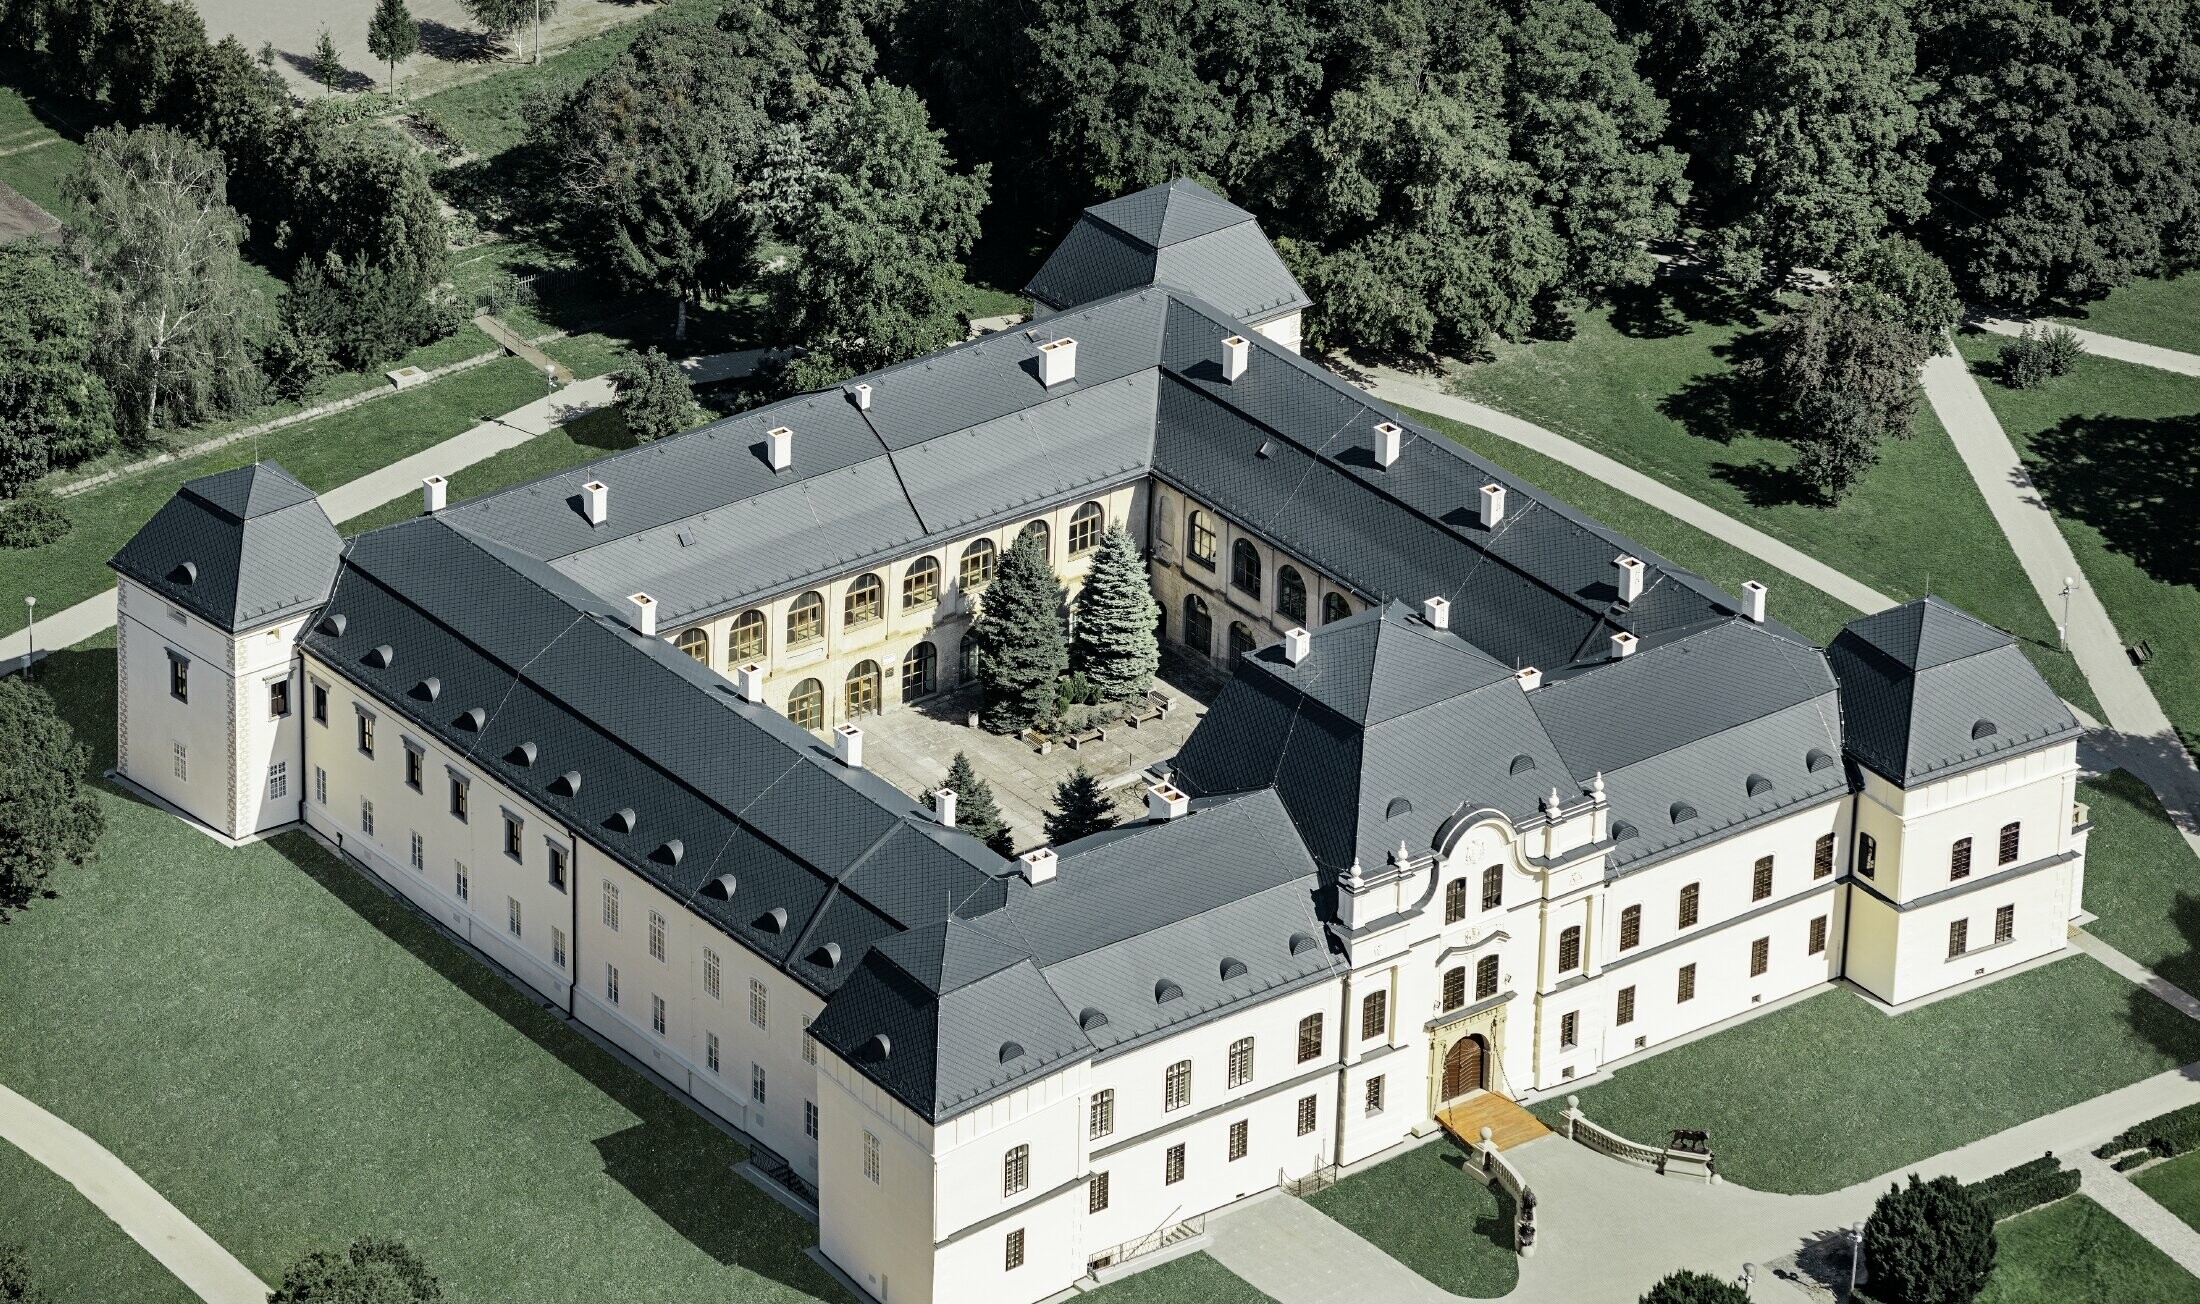 Built in the Renaissance style, Humenné Castle has been newly covered with PREFA roof tiles in anthracite